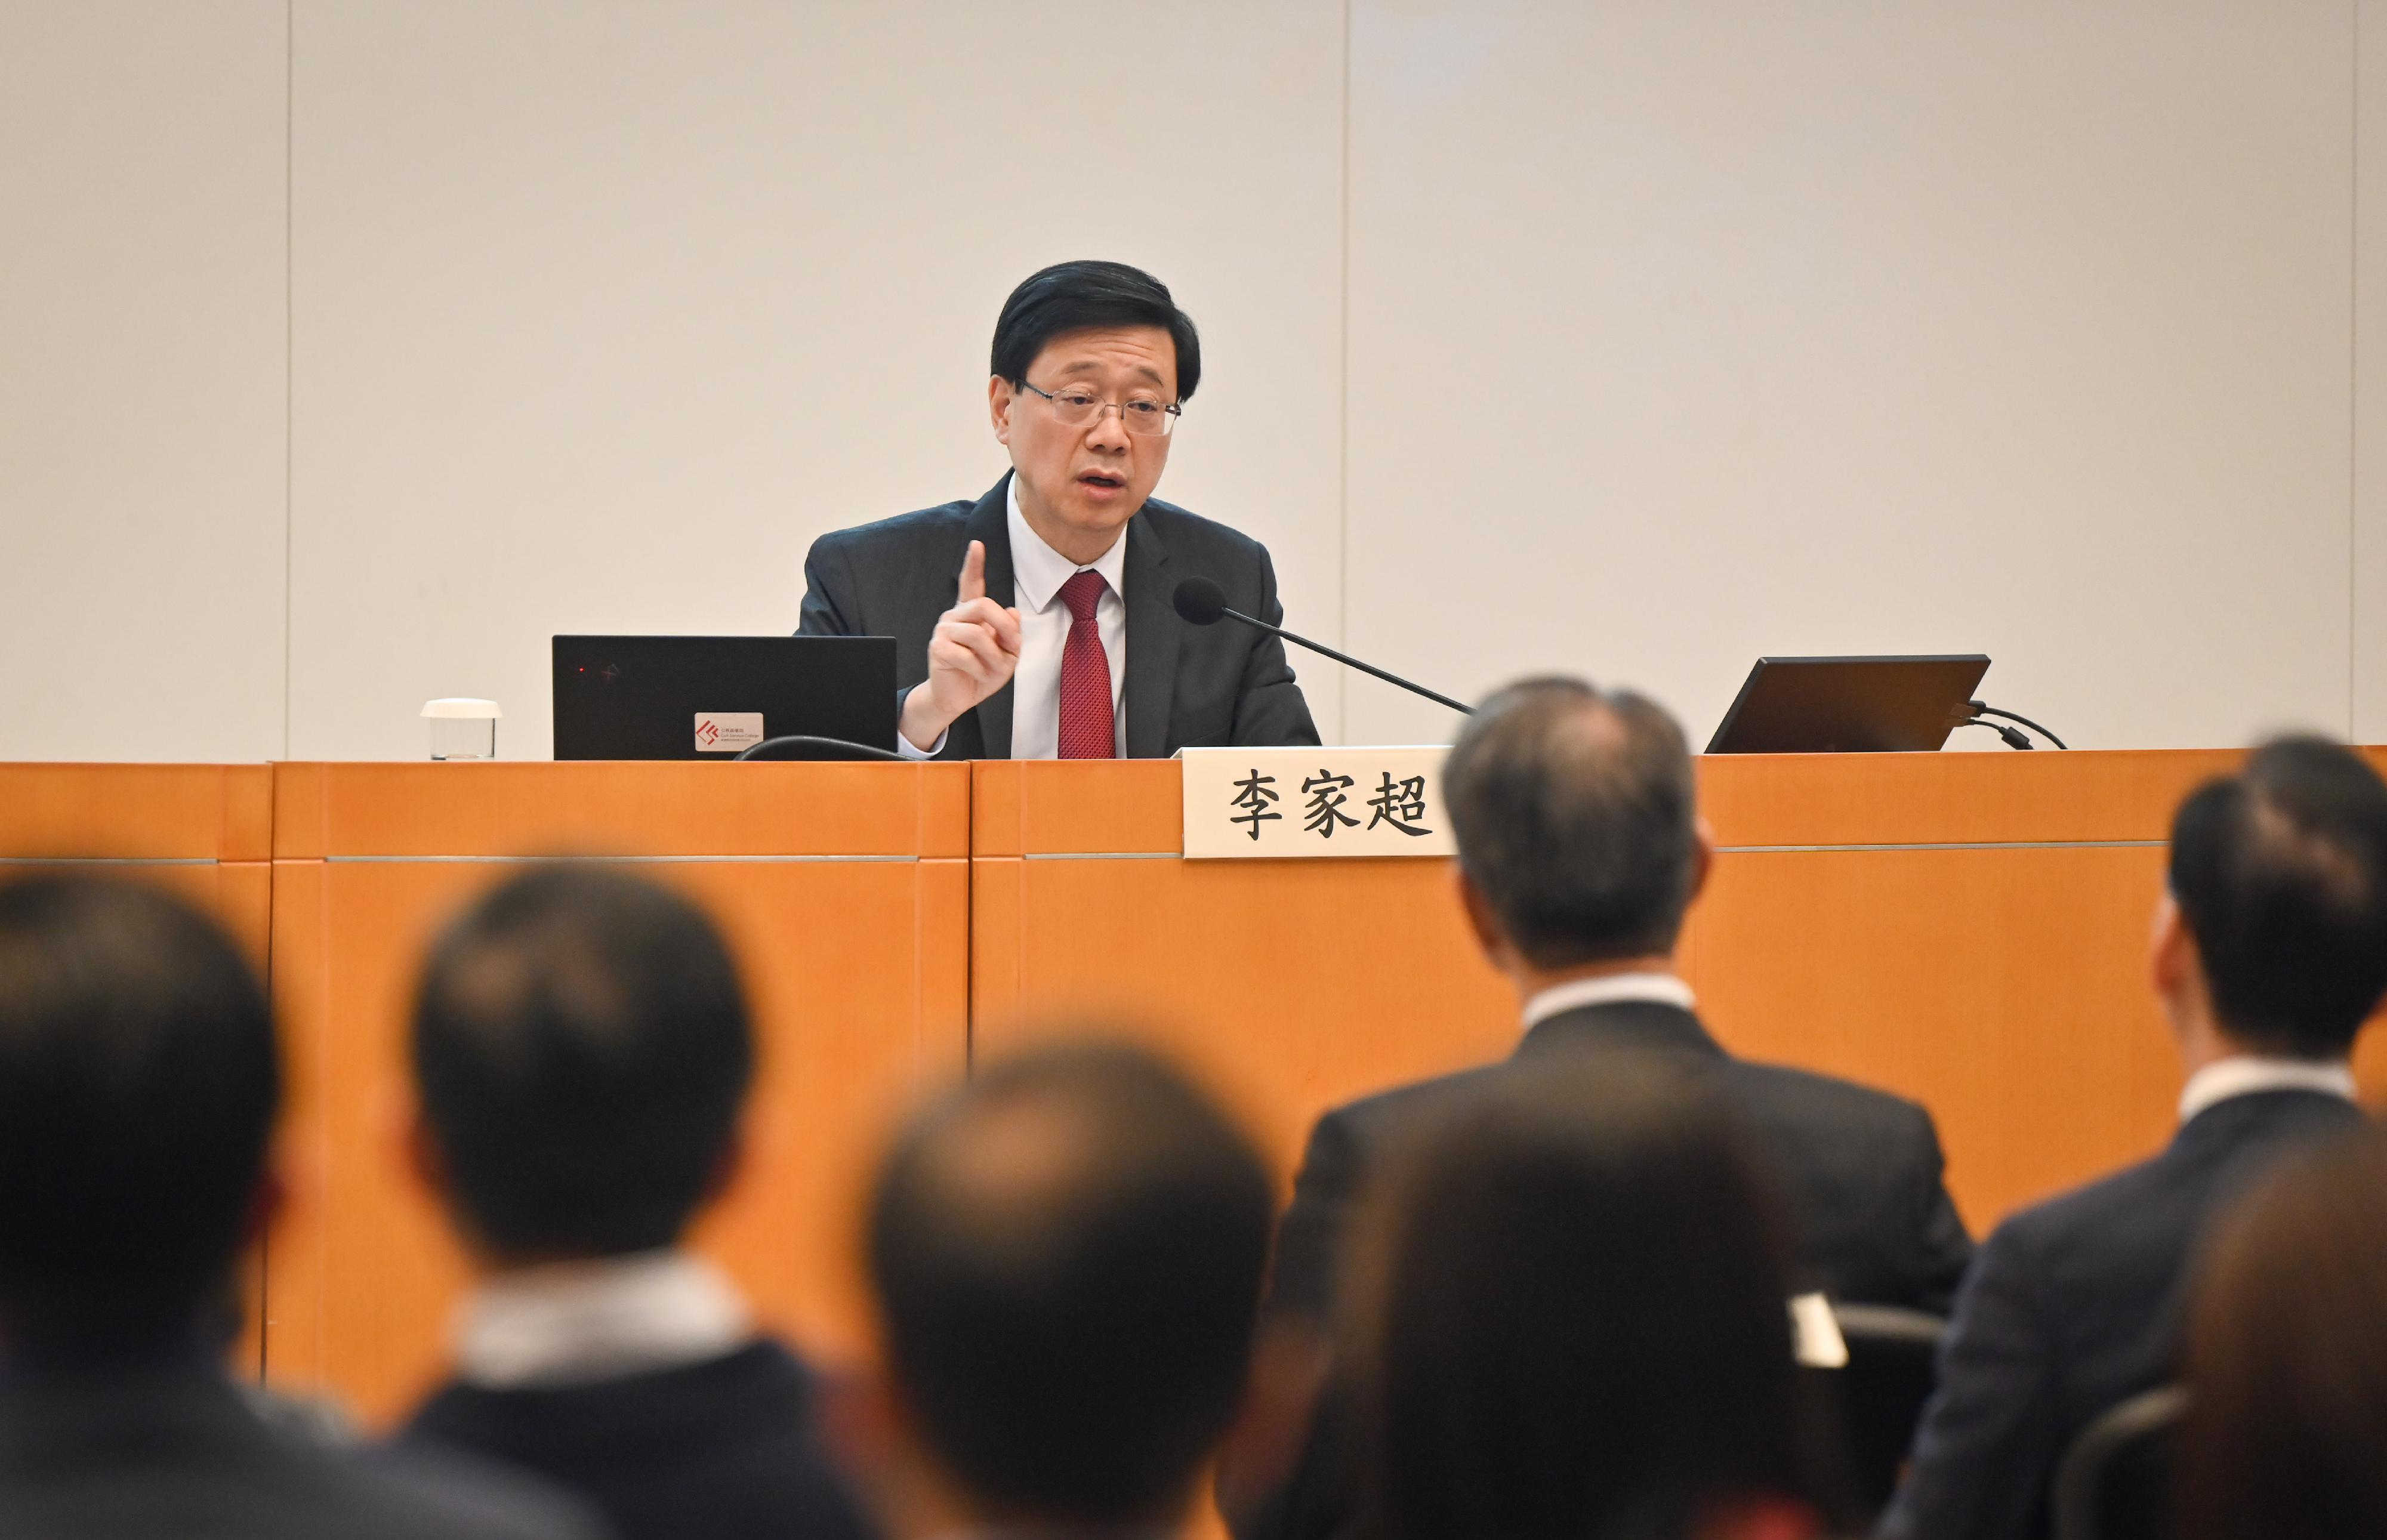 The Hong Kong Special Administrative Region Government today (March 24) held a sharing session on the spirit of "two sessions" at the Central Government Offices. Photo shows the Chief Executive, Mr John Lee, speaking at the sharing session.